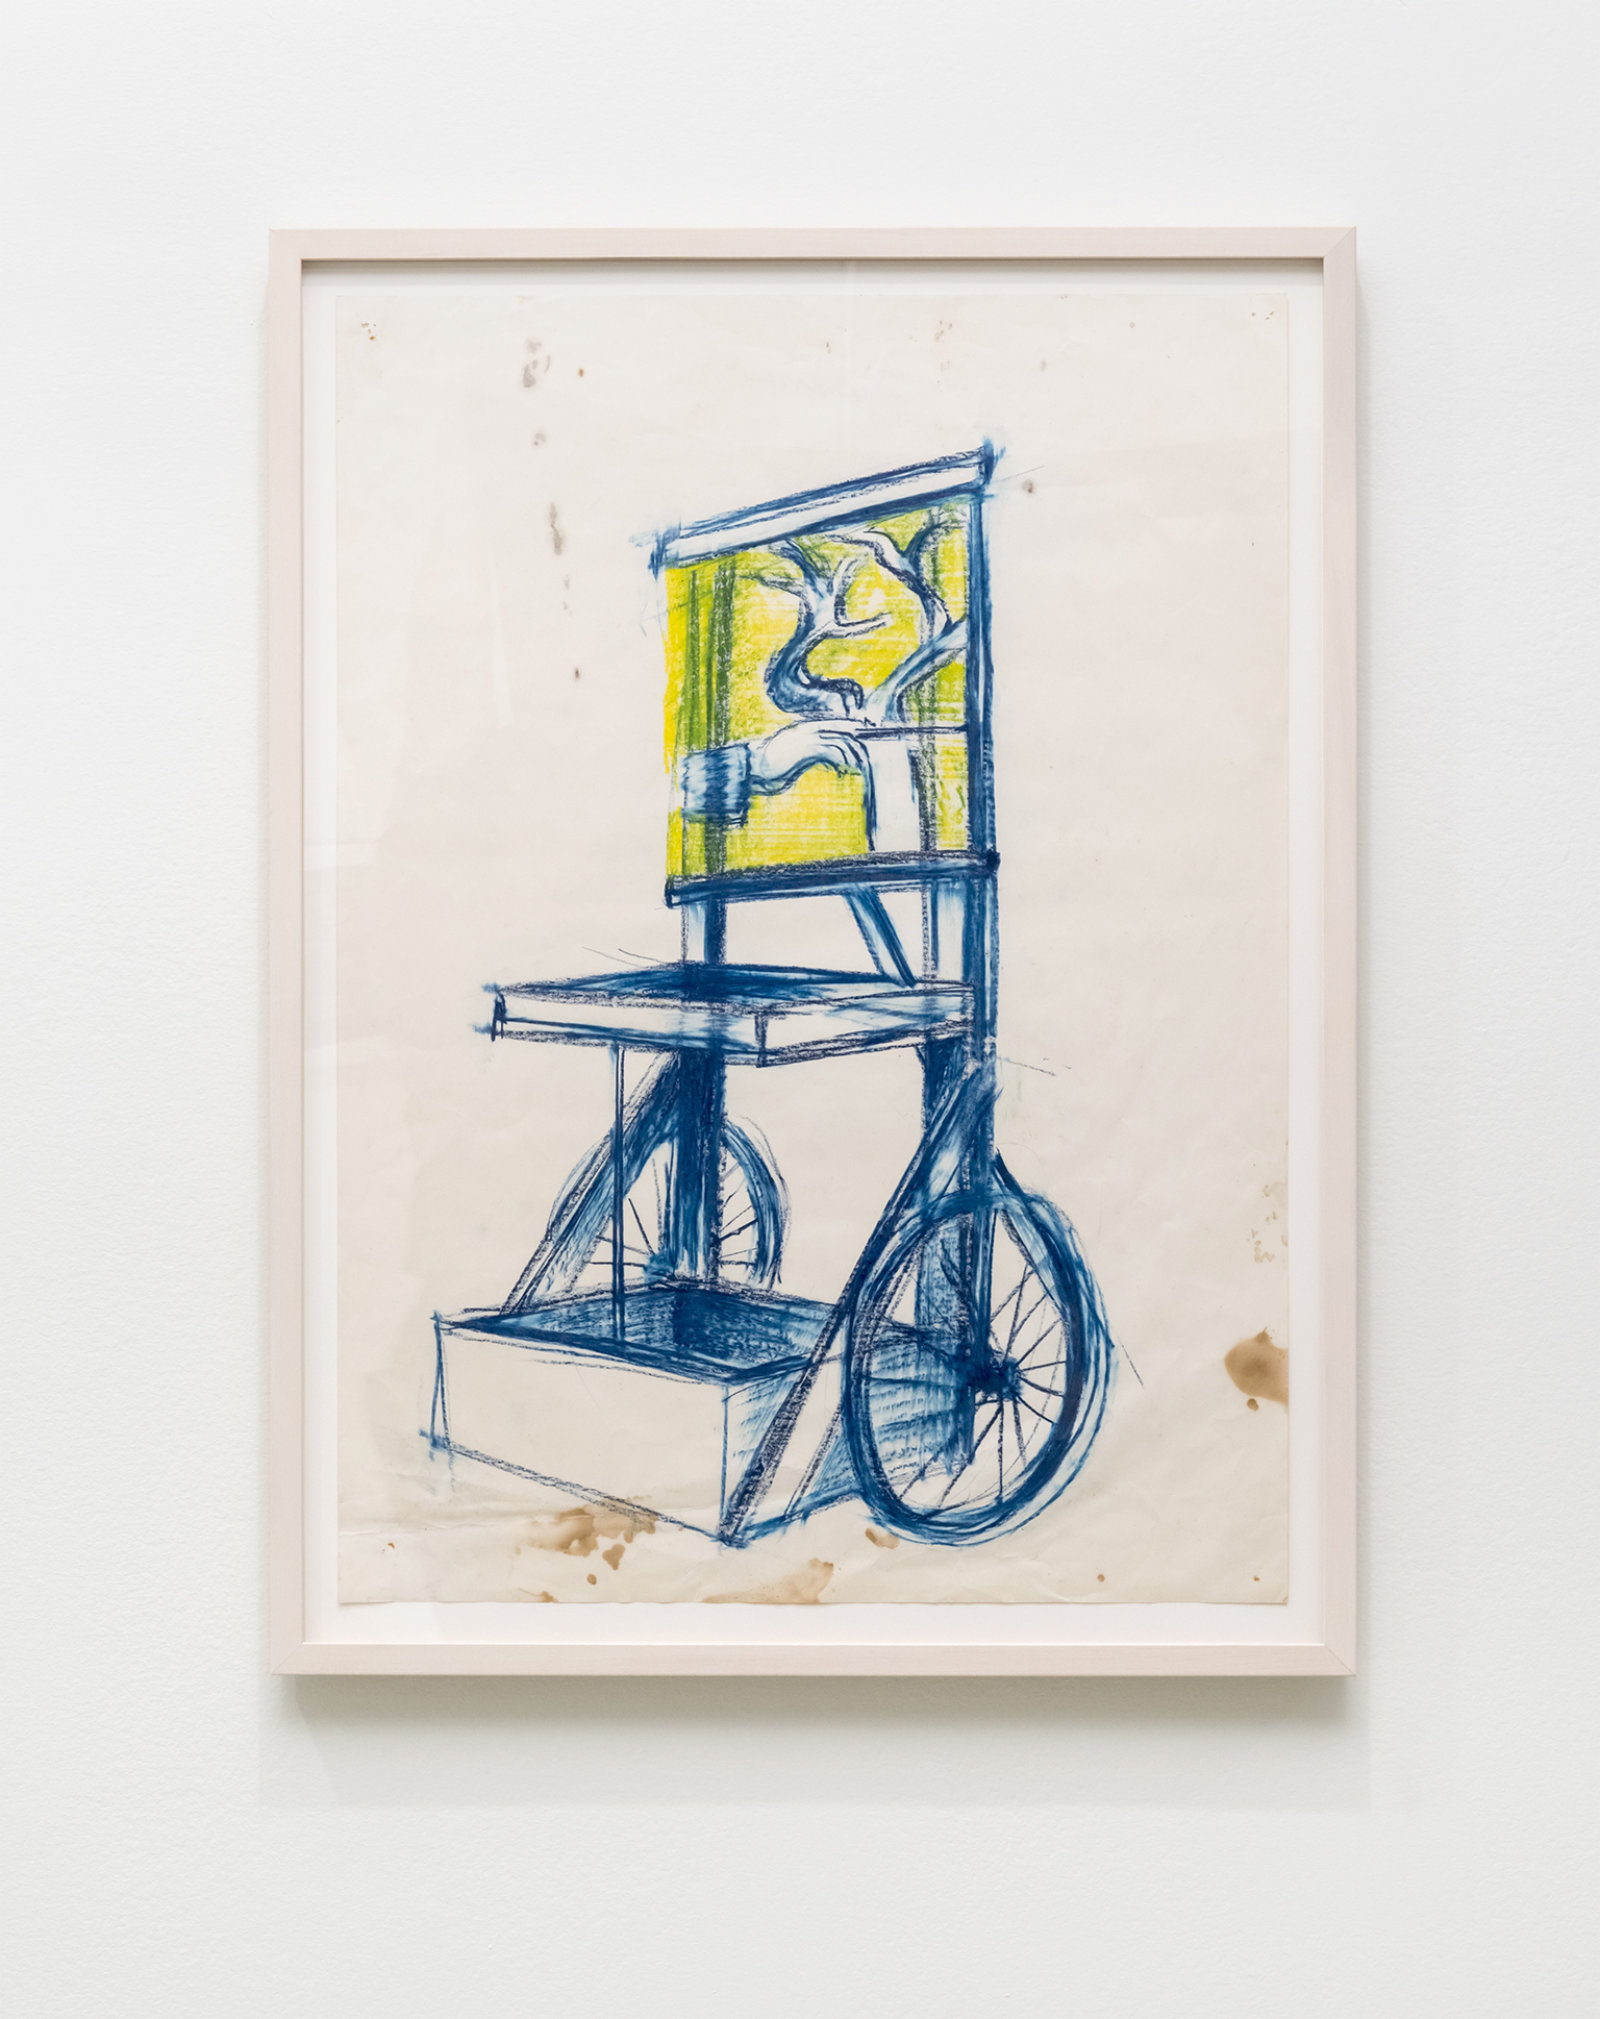 Jerry Pethick, Pissaro’s Easel Contraption, 1984, pastel on paper, dimensions variable